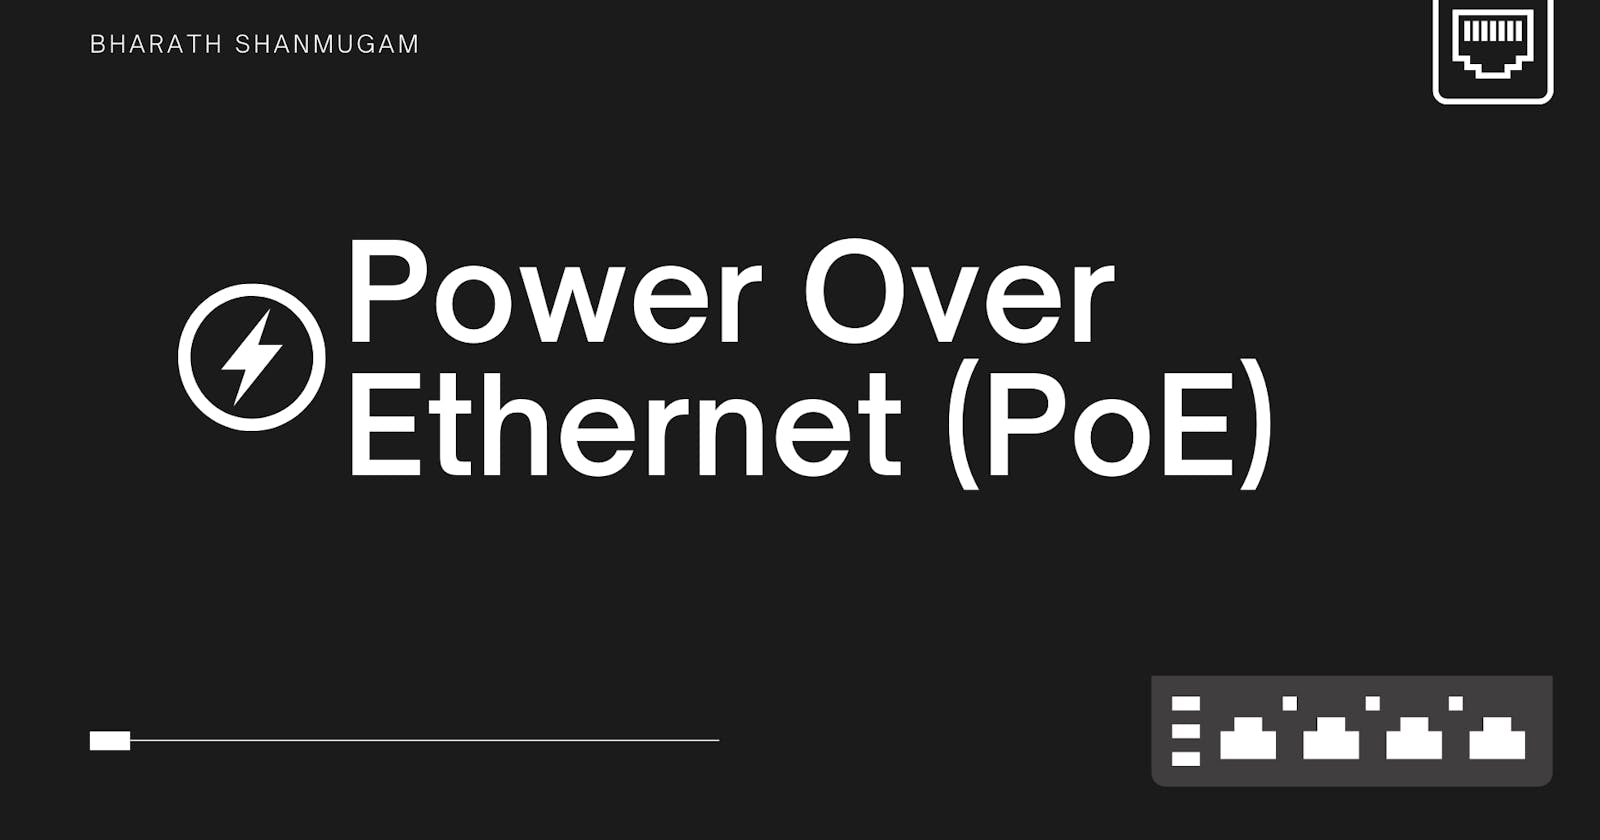 Power Over Ethernet (PoE)